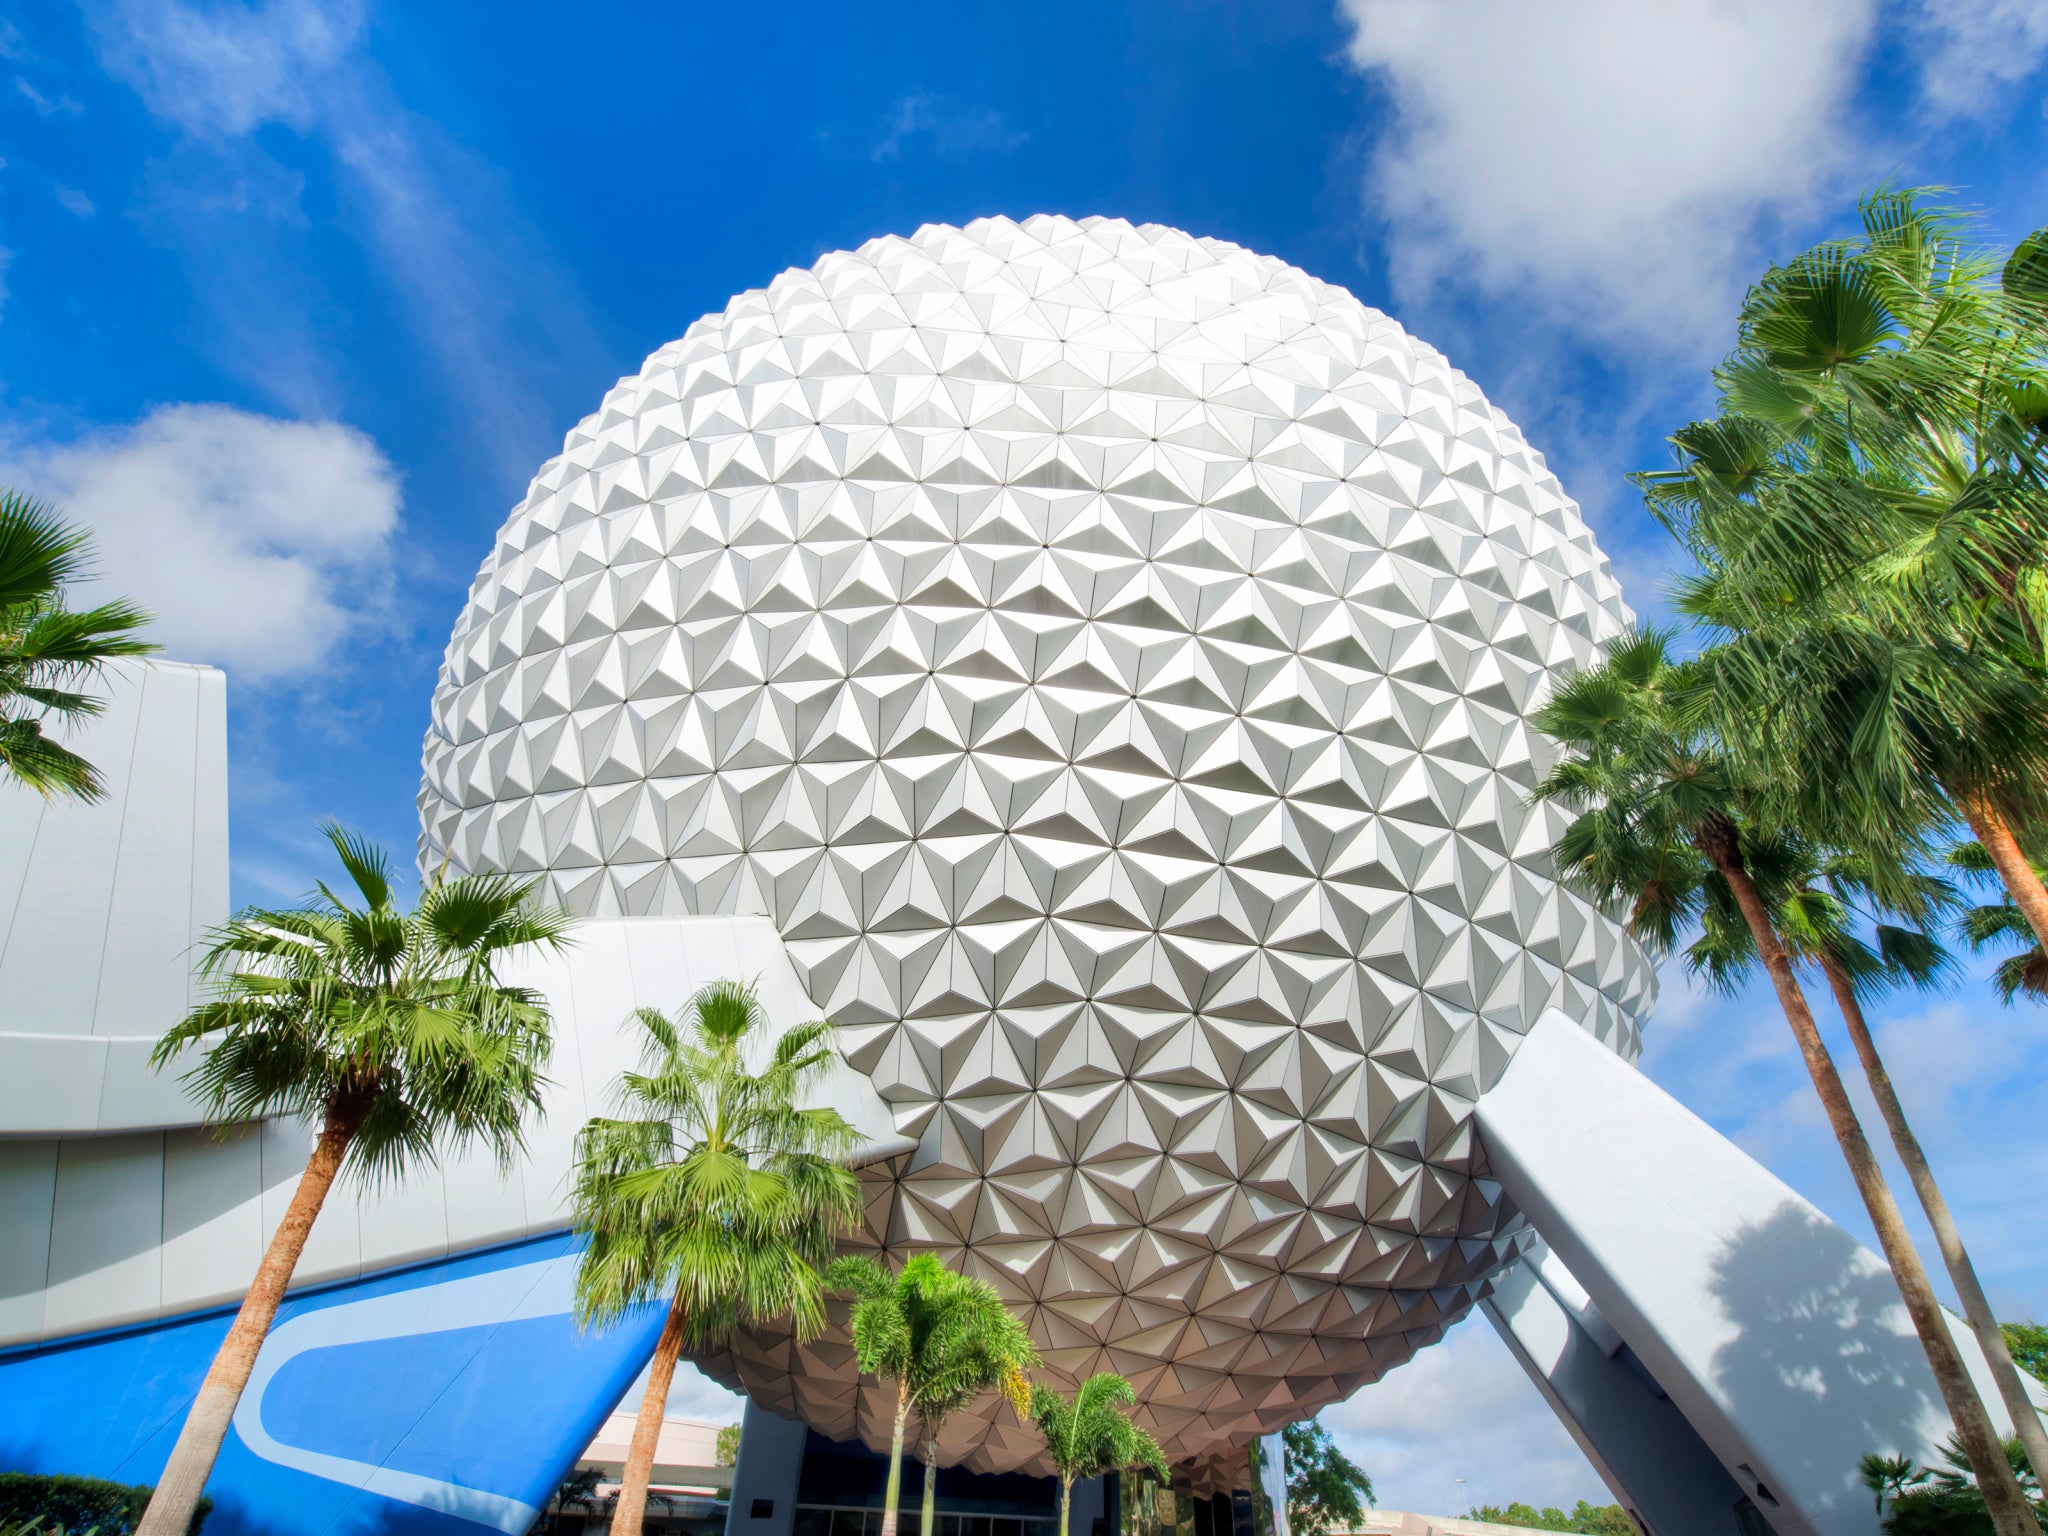 Epcot’s 18-story-tall geodesic sphere is home to a ride